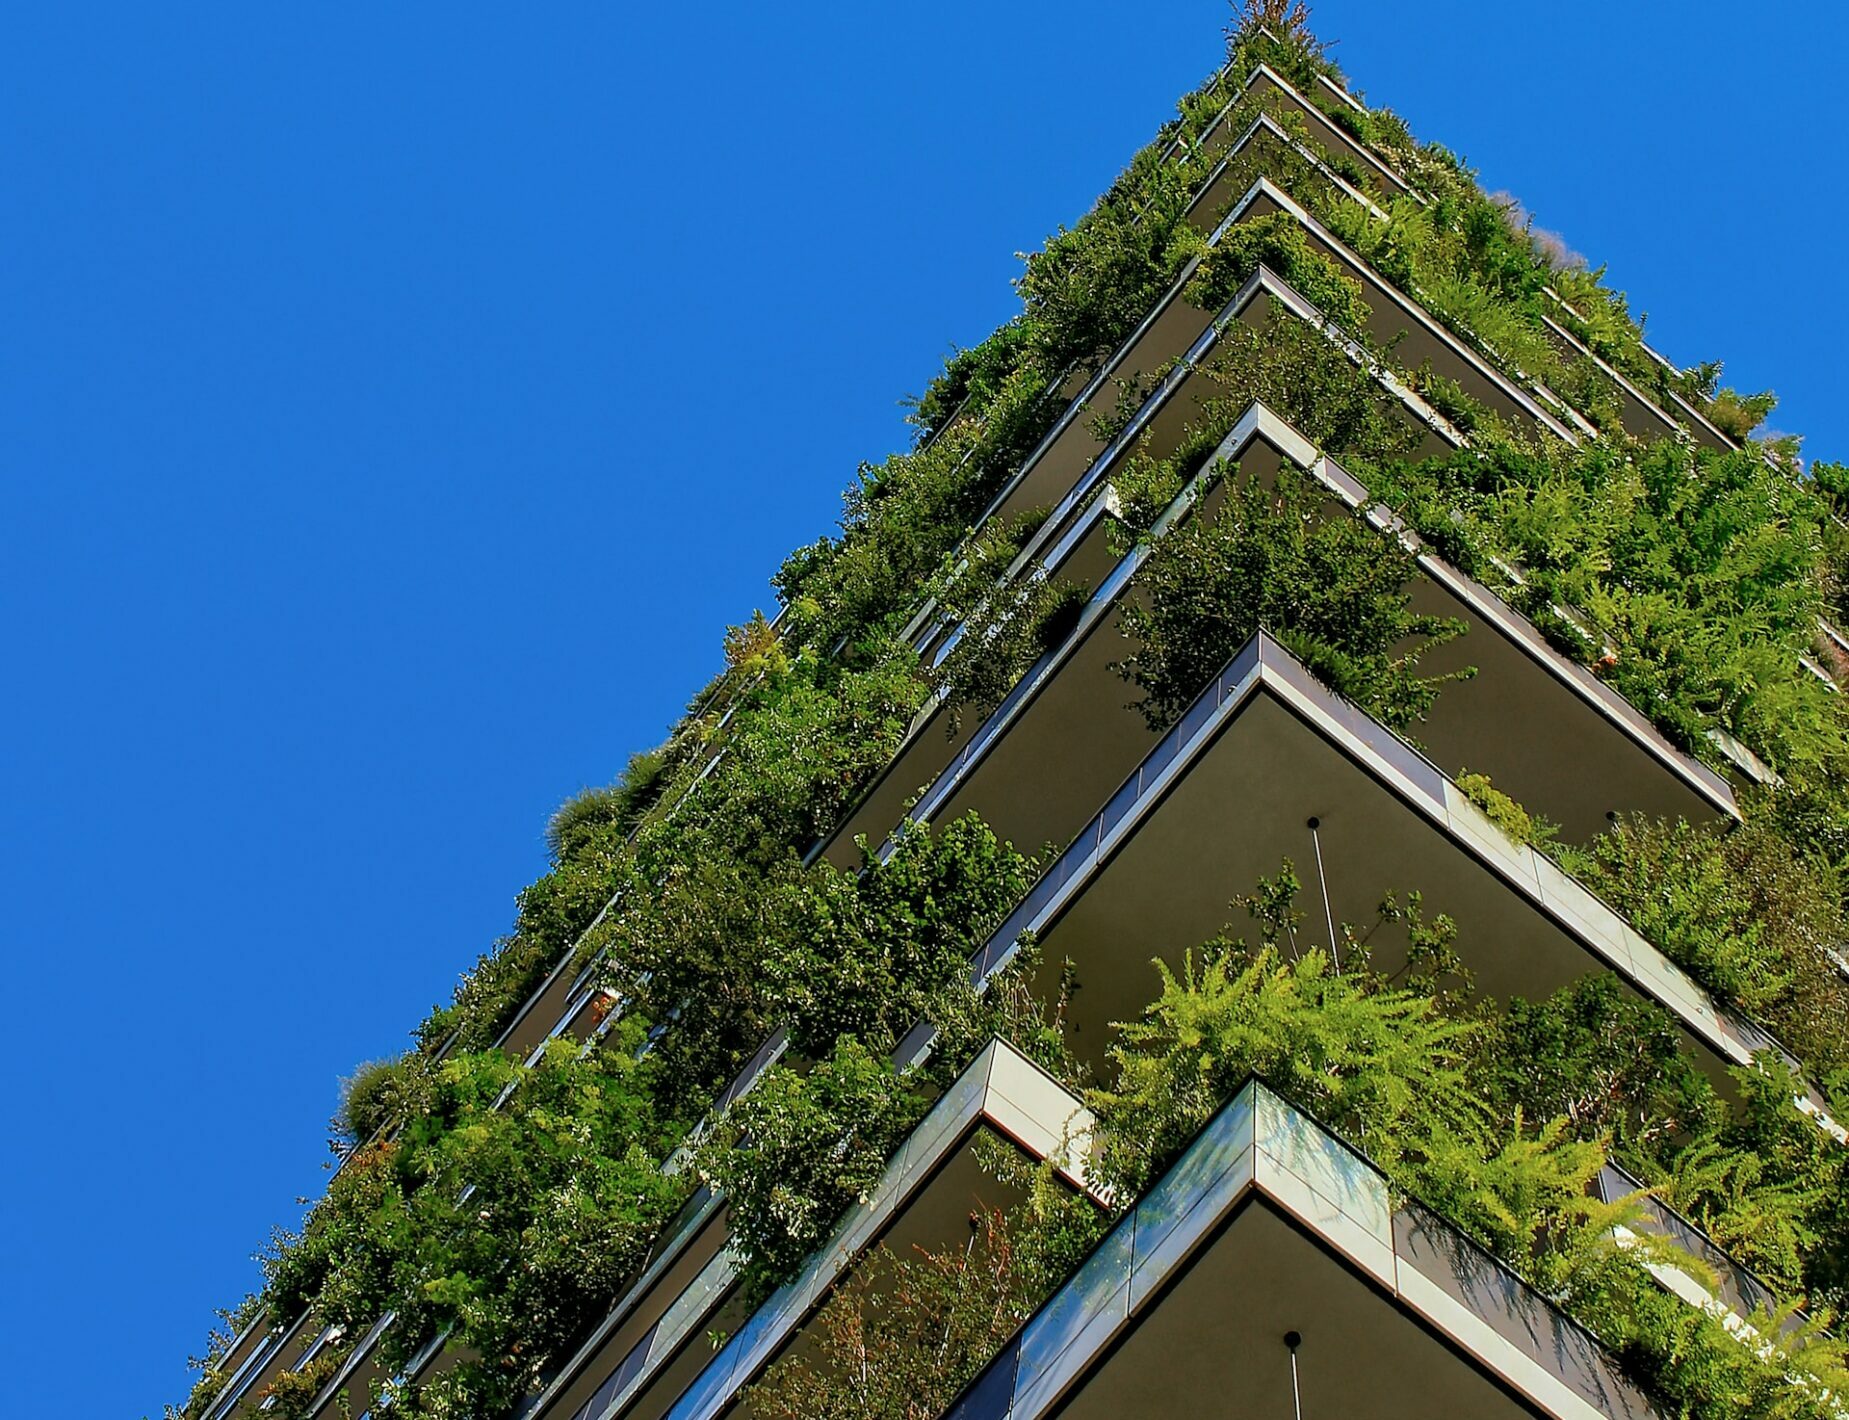 image of 'green housing' a block of flats with flourishing green plants | HCLTech and Schneider Electric